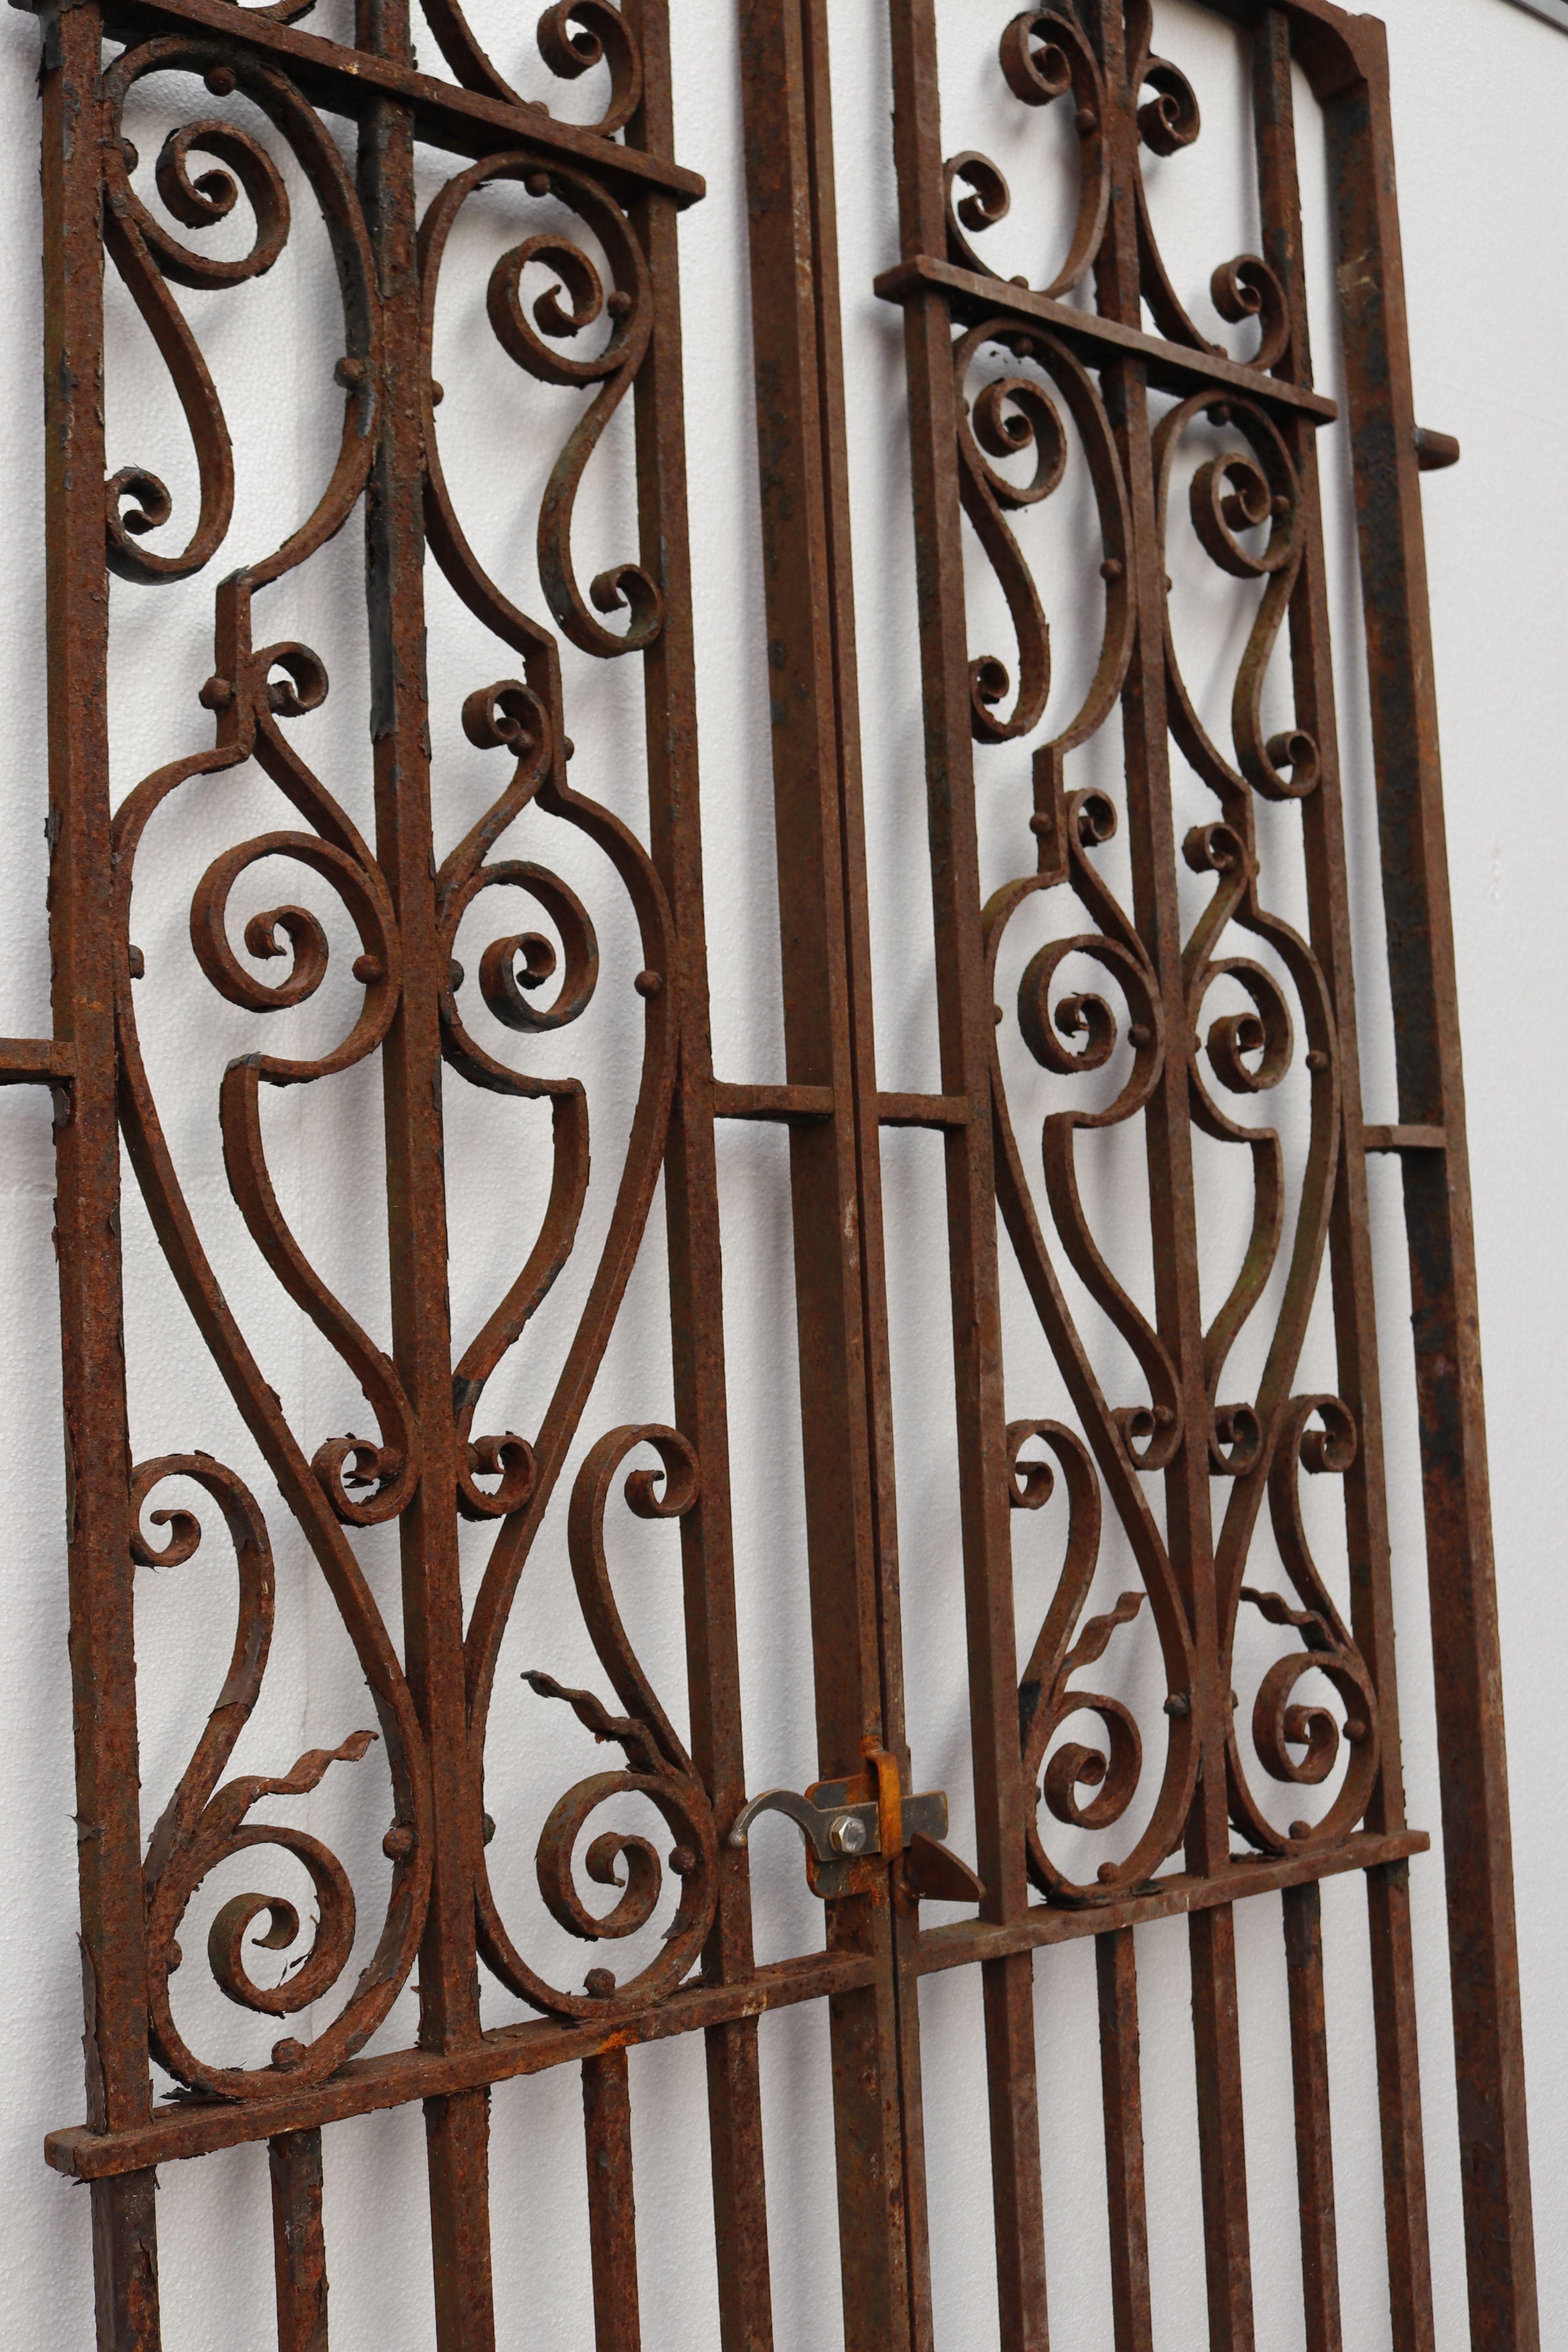 Pair of Tall Wrought Iron Gates In Good Condition For Sale In Wormelow, Herefordshire